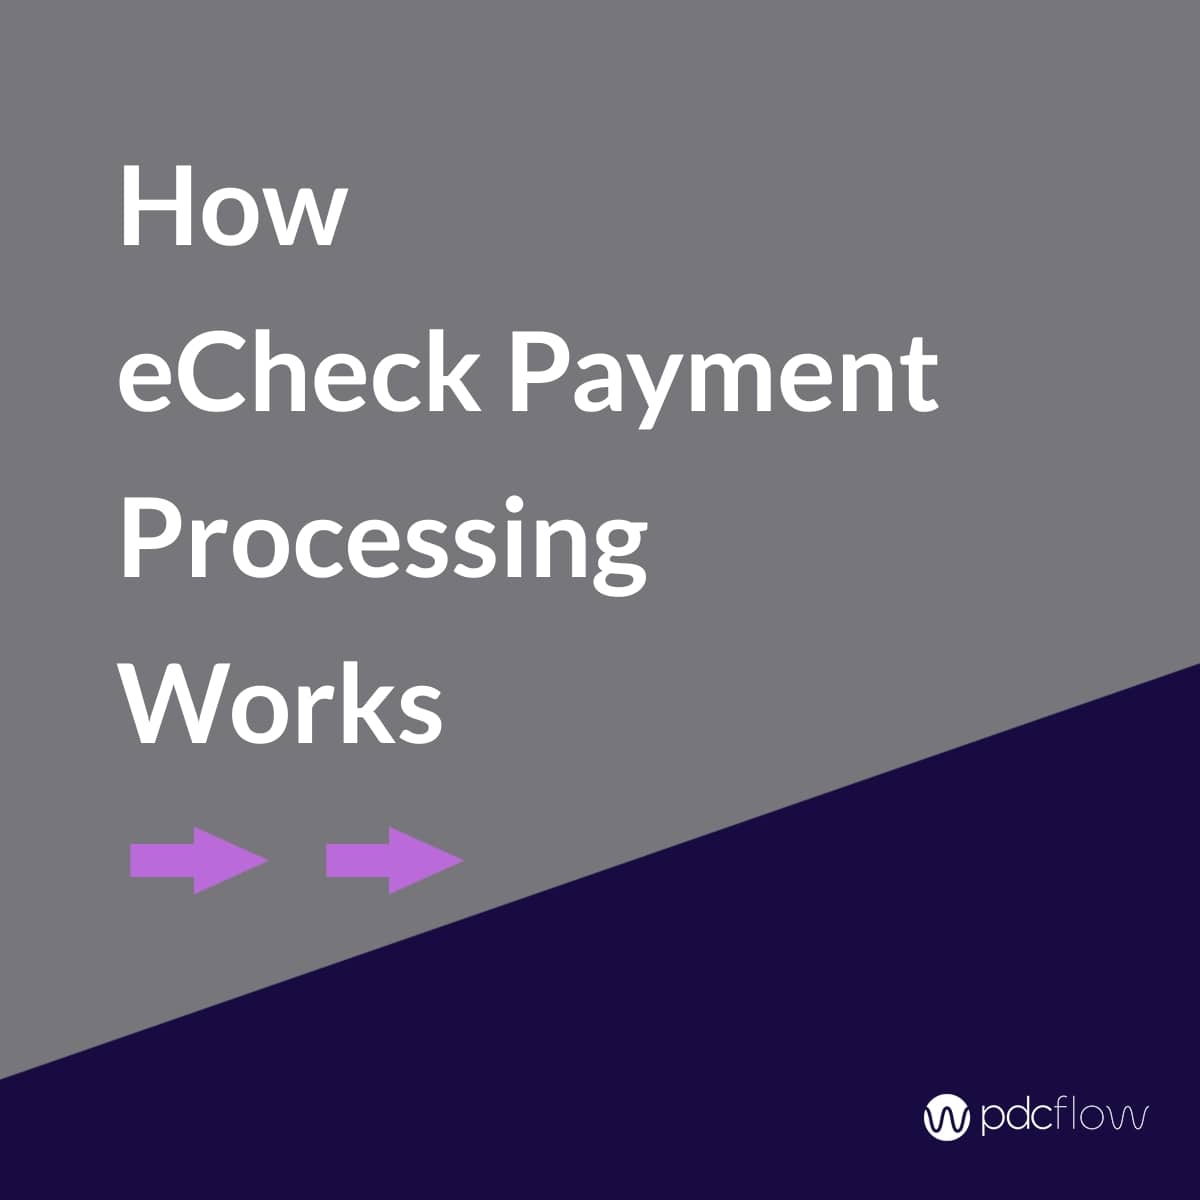 How eCheck Payment Processing Works